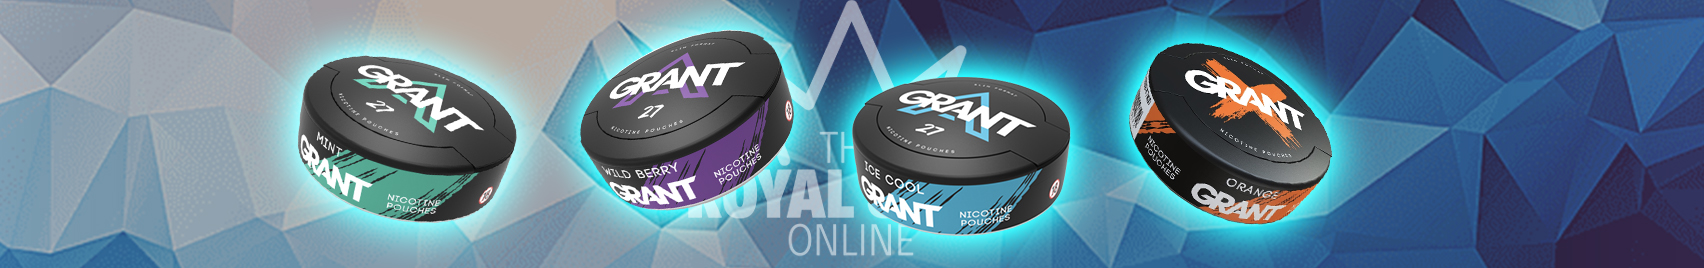 Buy GRANT nicotine pouches at The Royal Snus Online